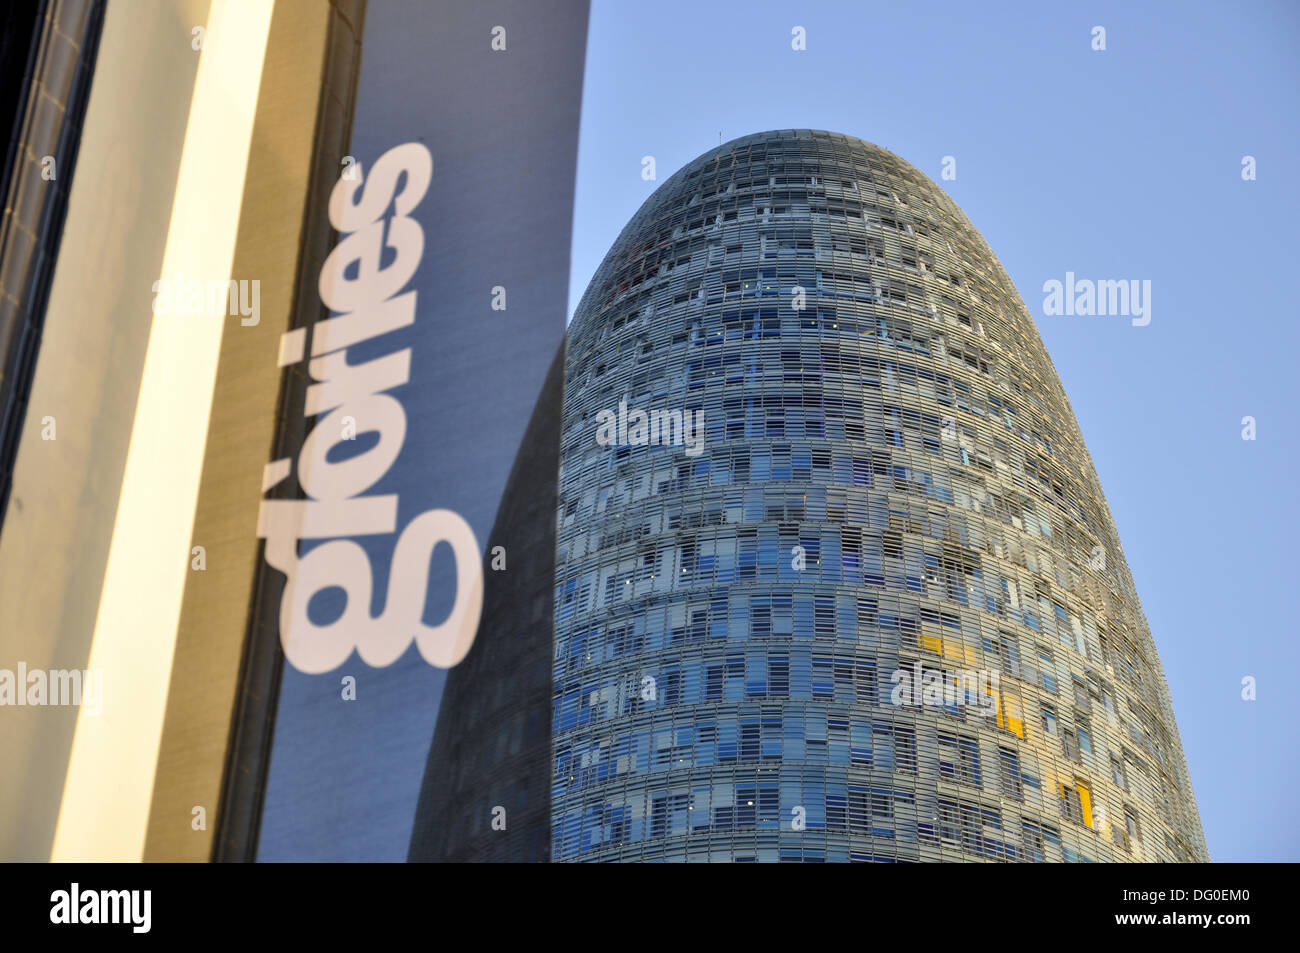 Barcelona, Spain. 12th May, 2013. View of the office complex Torre Agbar and shopping mall 'Les Glories' on the Avinguda Diagonal in Barcelona, Spain, 12 May 2013. Fotoarchiv für ZeitgeschichteS.Steinach/dpa/Alamy Live News Stock Photo